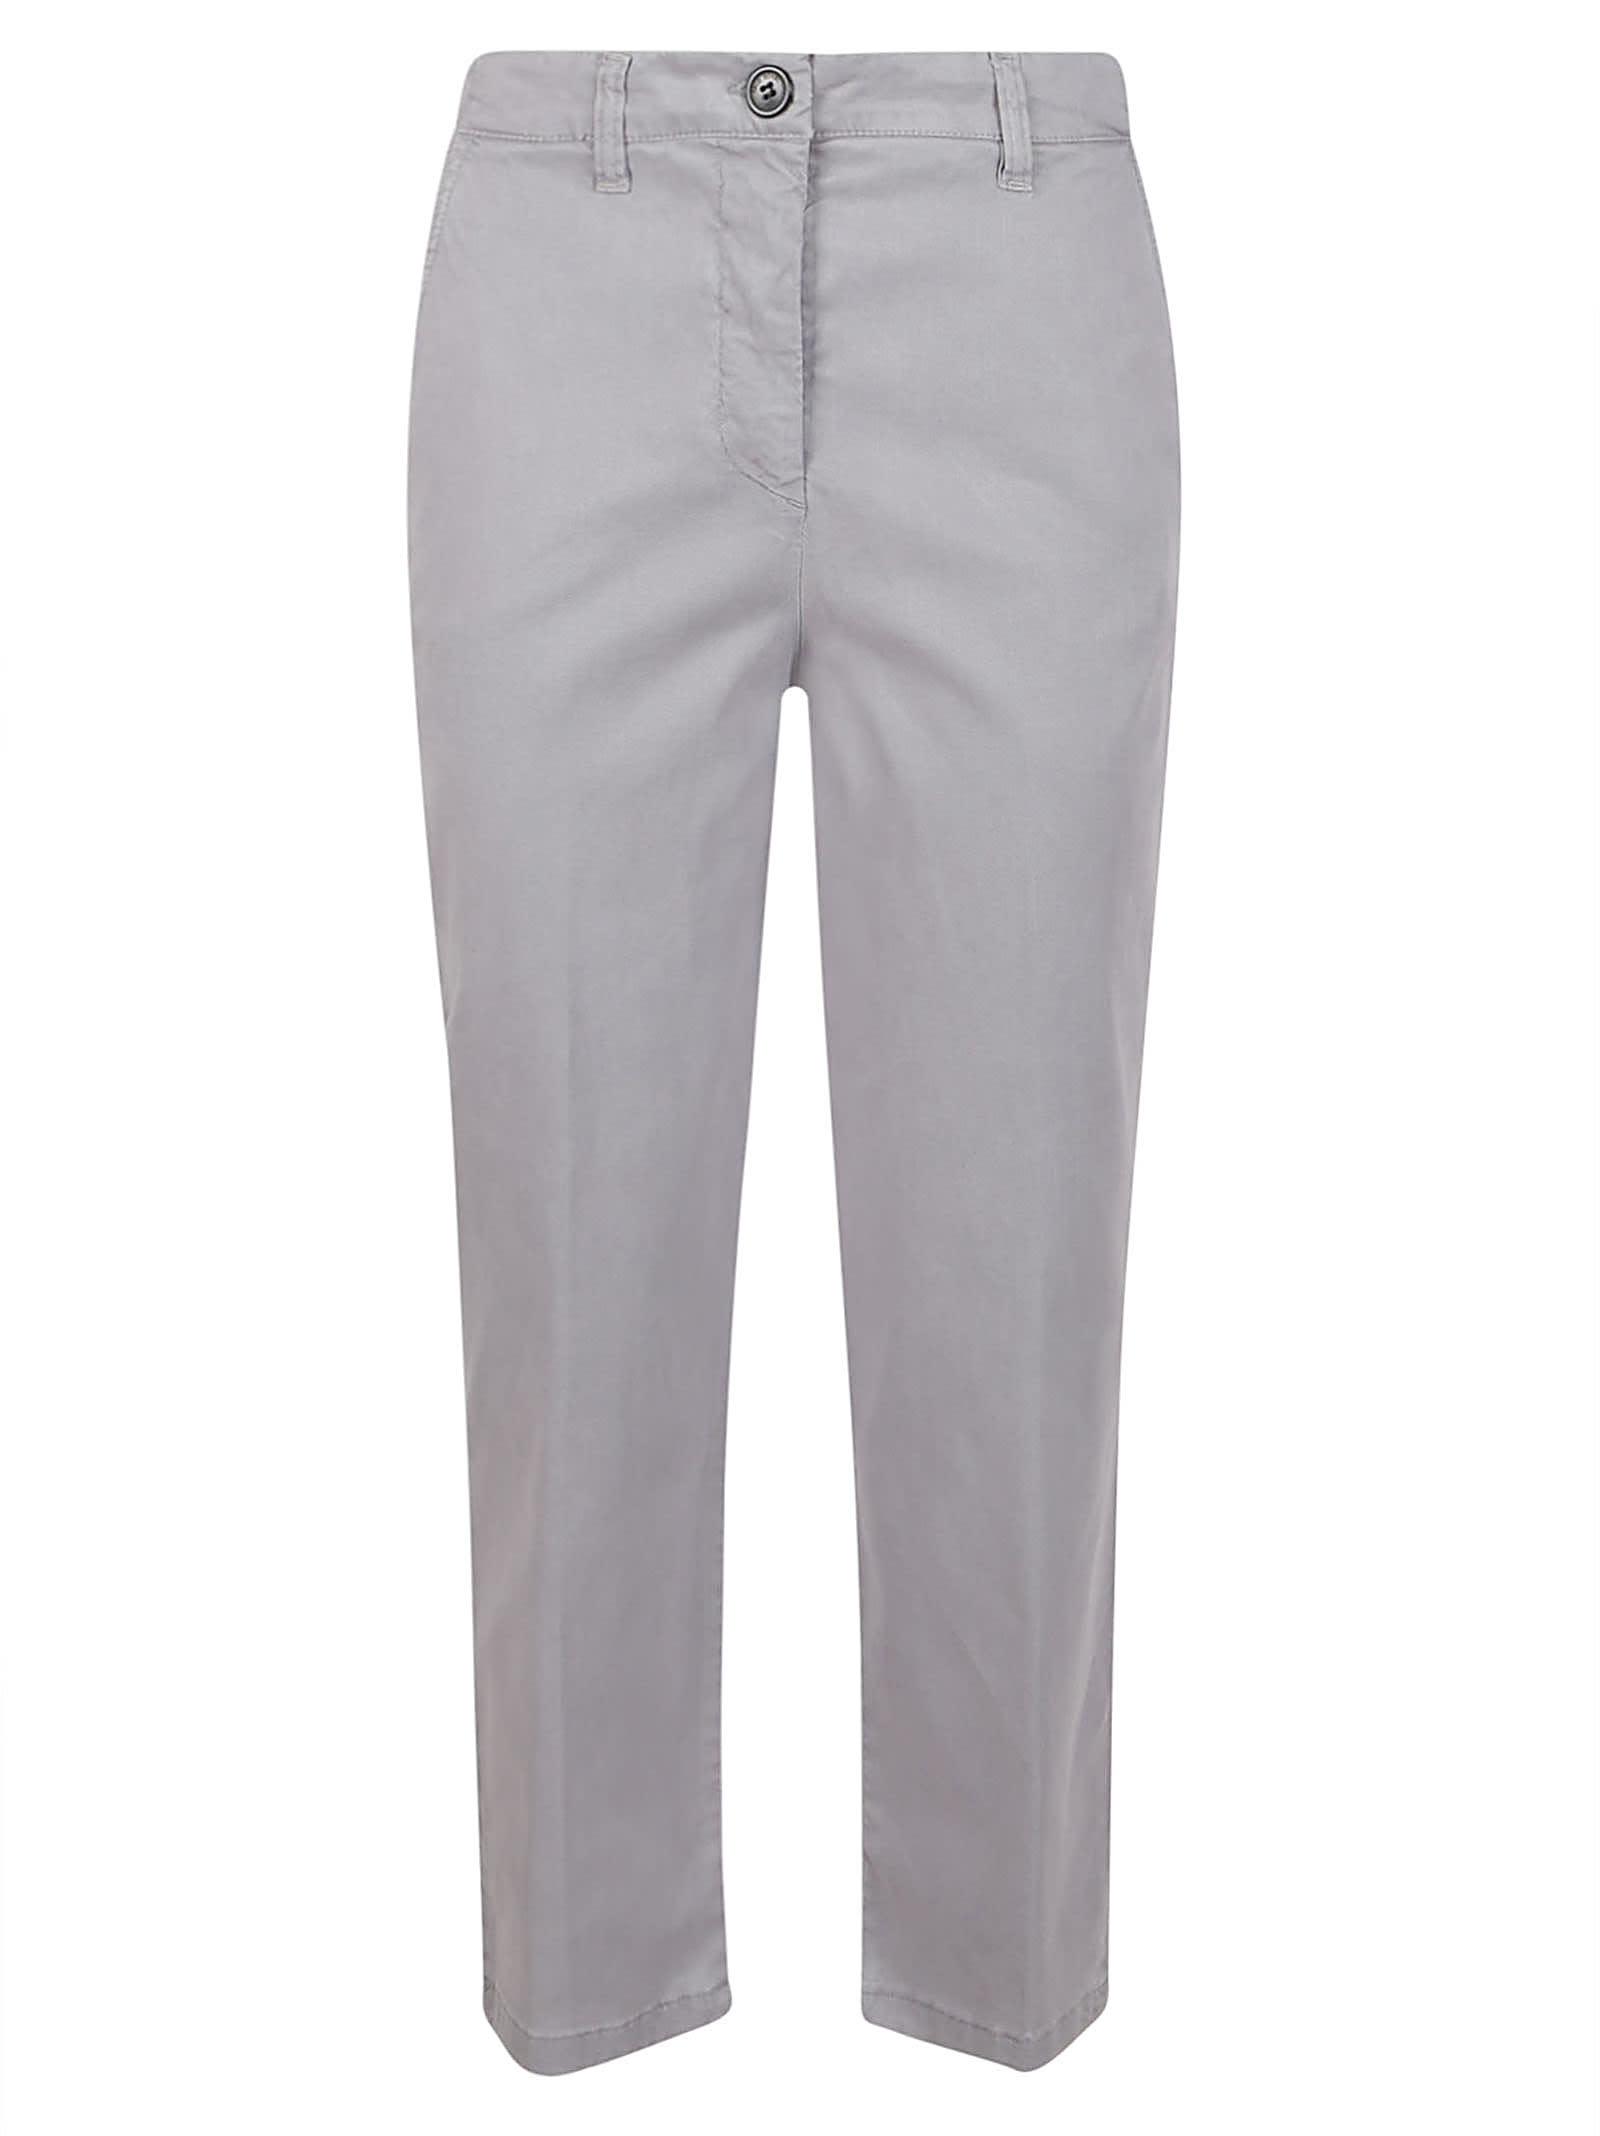 Trousers Grey